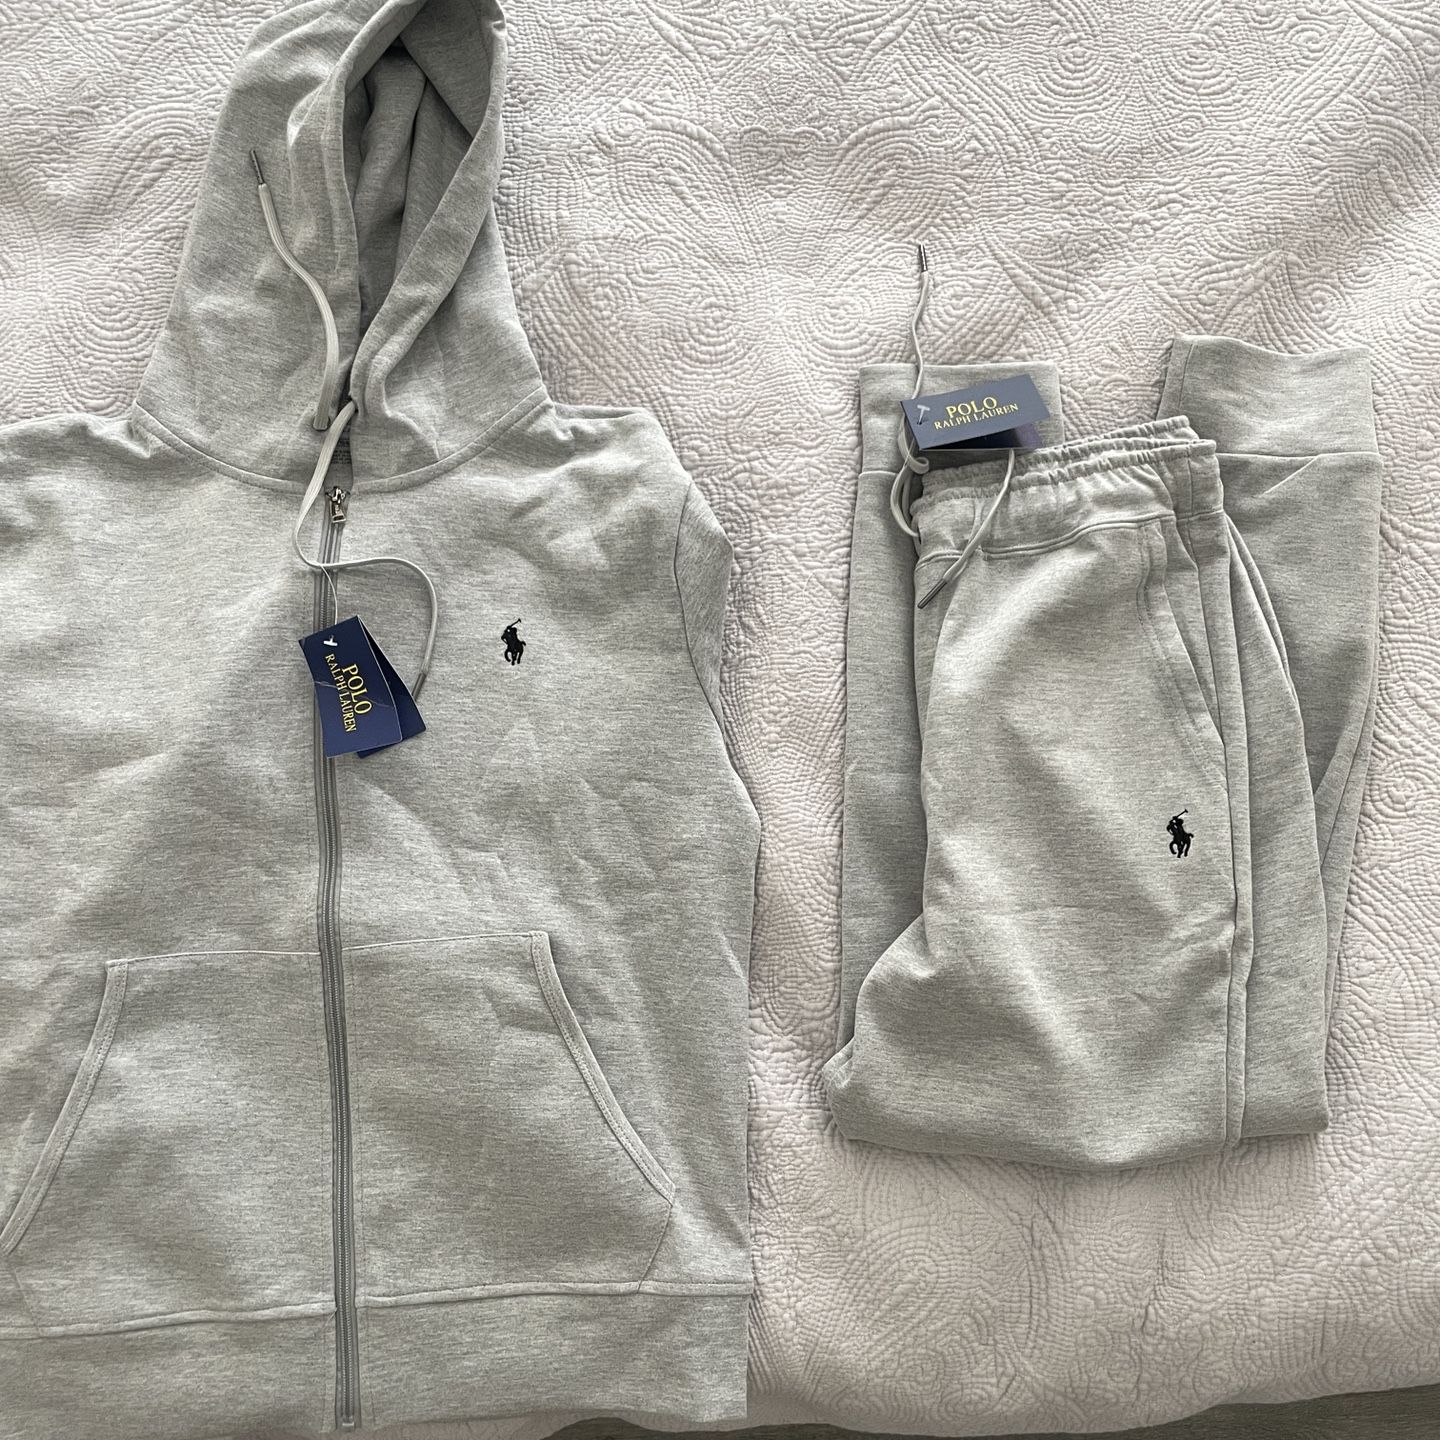 Polo Ralph Lauren Track suit for Sale in Los Angeles, CA - OfferUp